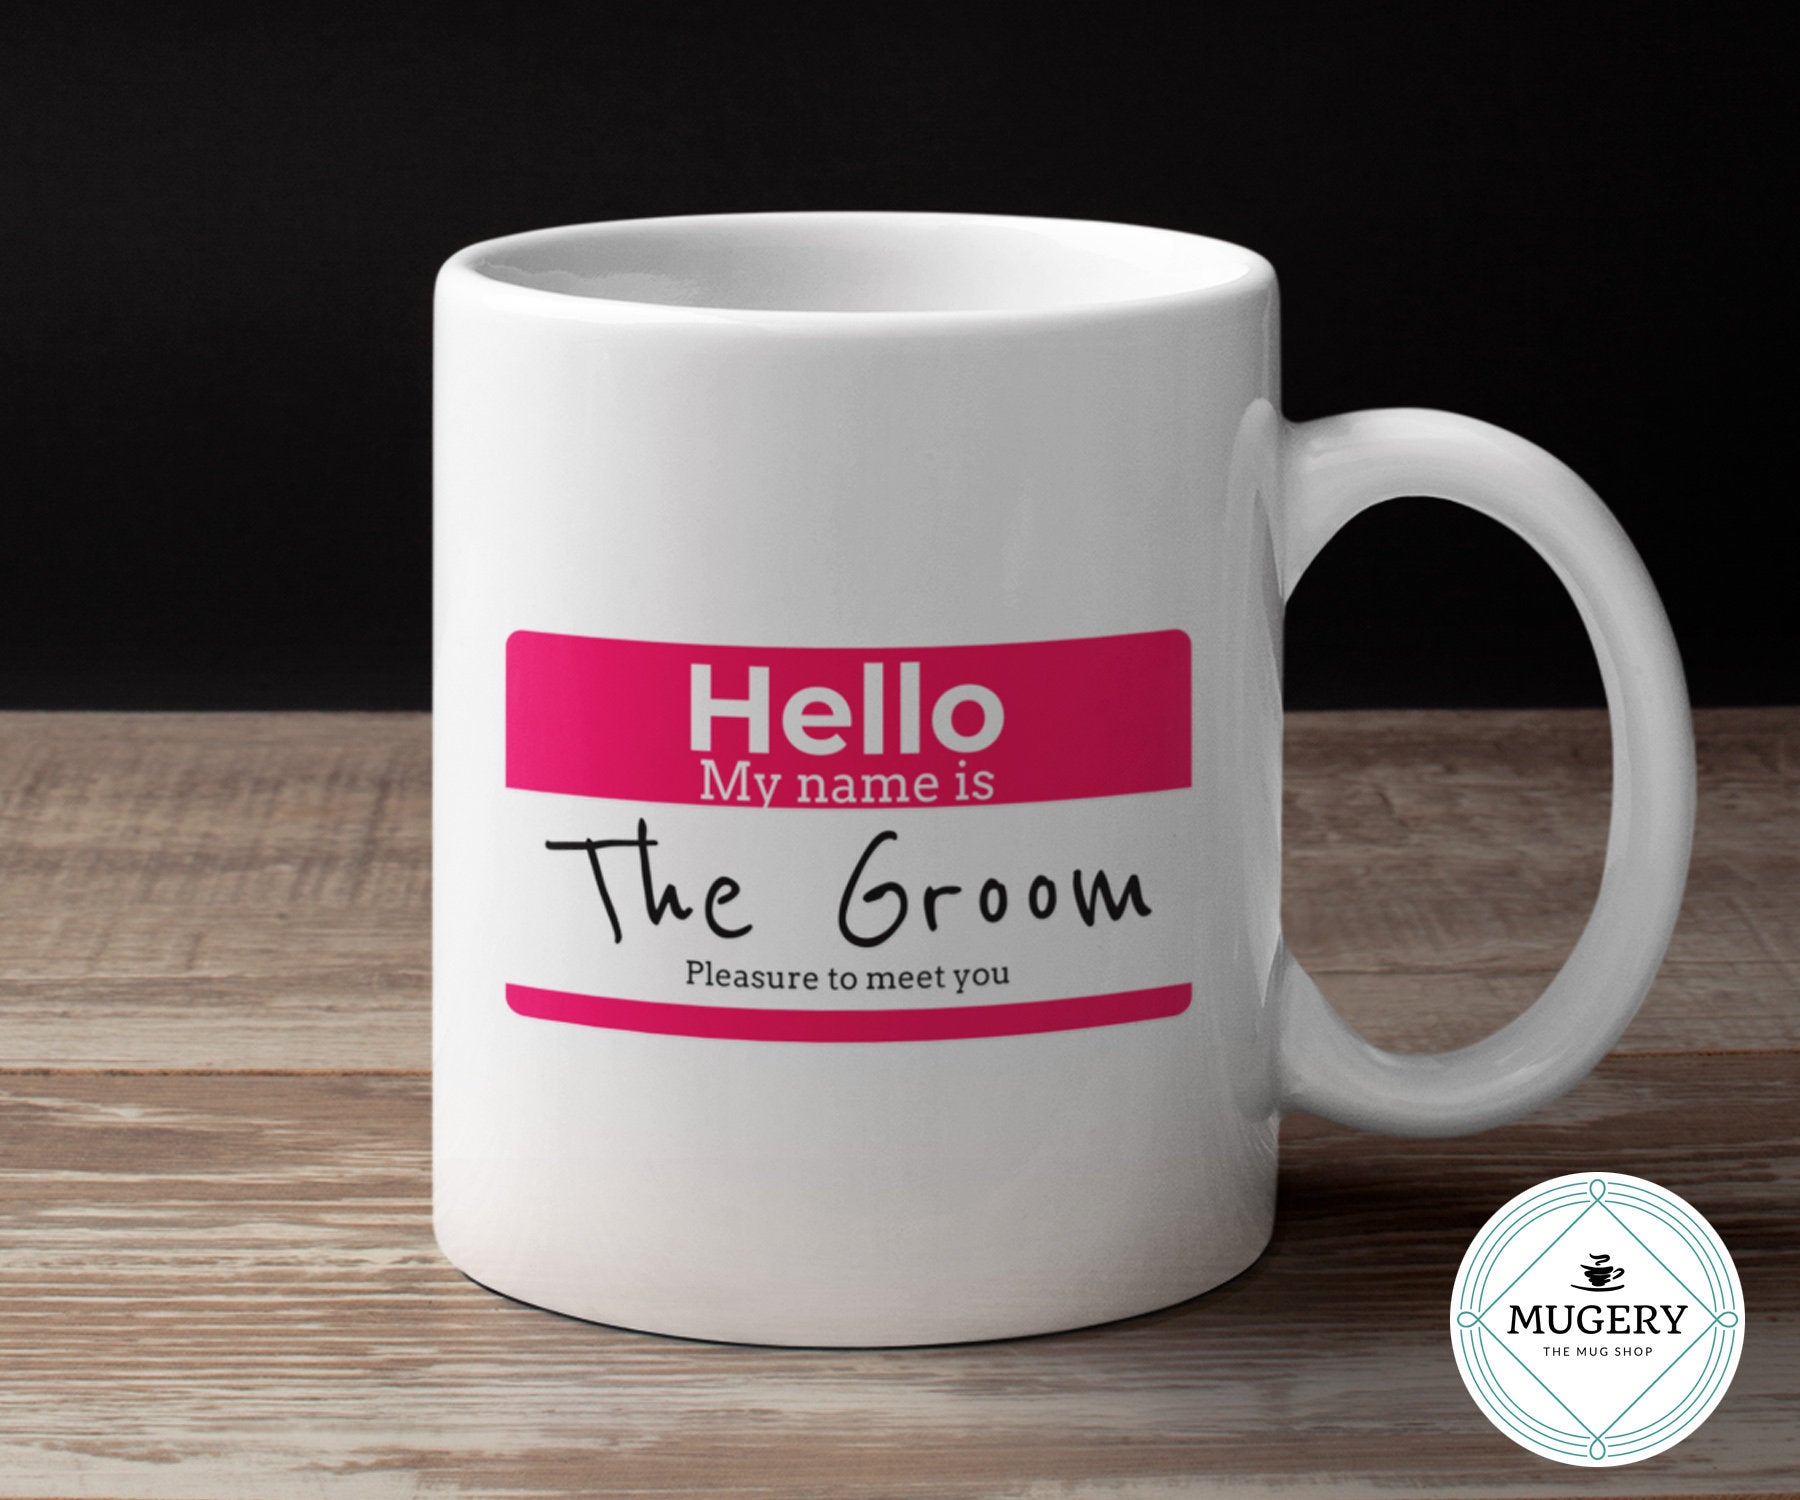 Hello My Name is The Groom Mug - Guestbookery